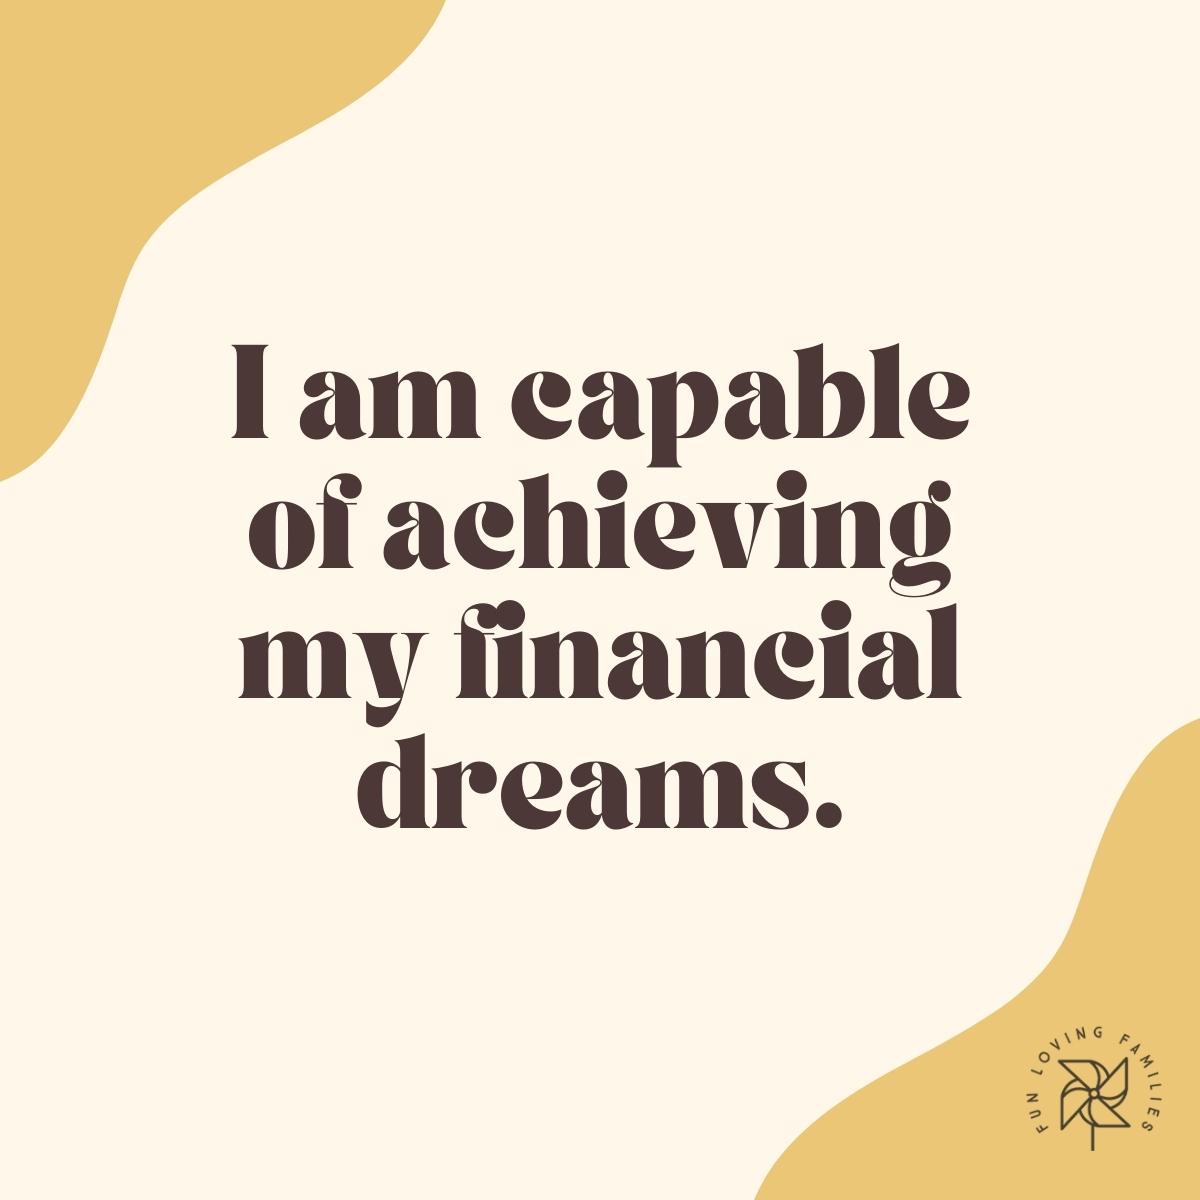 I am capable of achieving my financial dreams affirmation